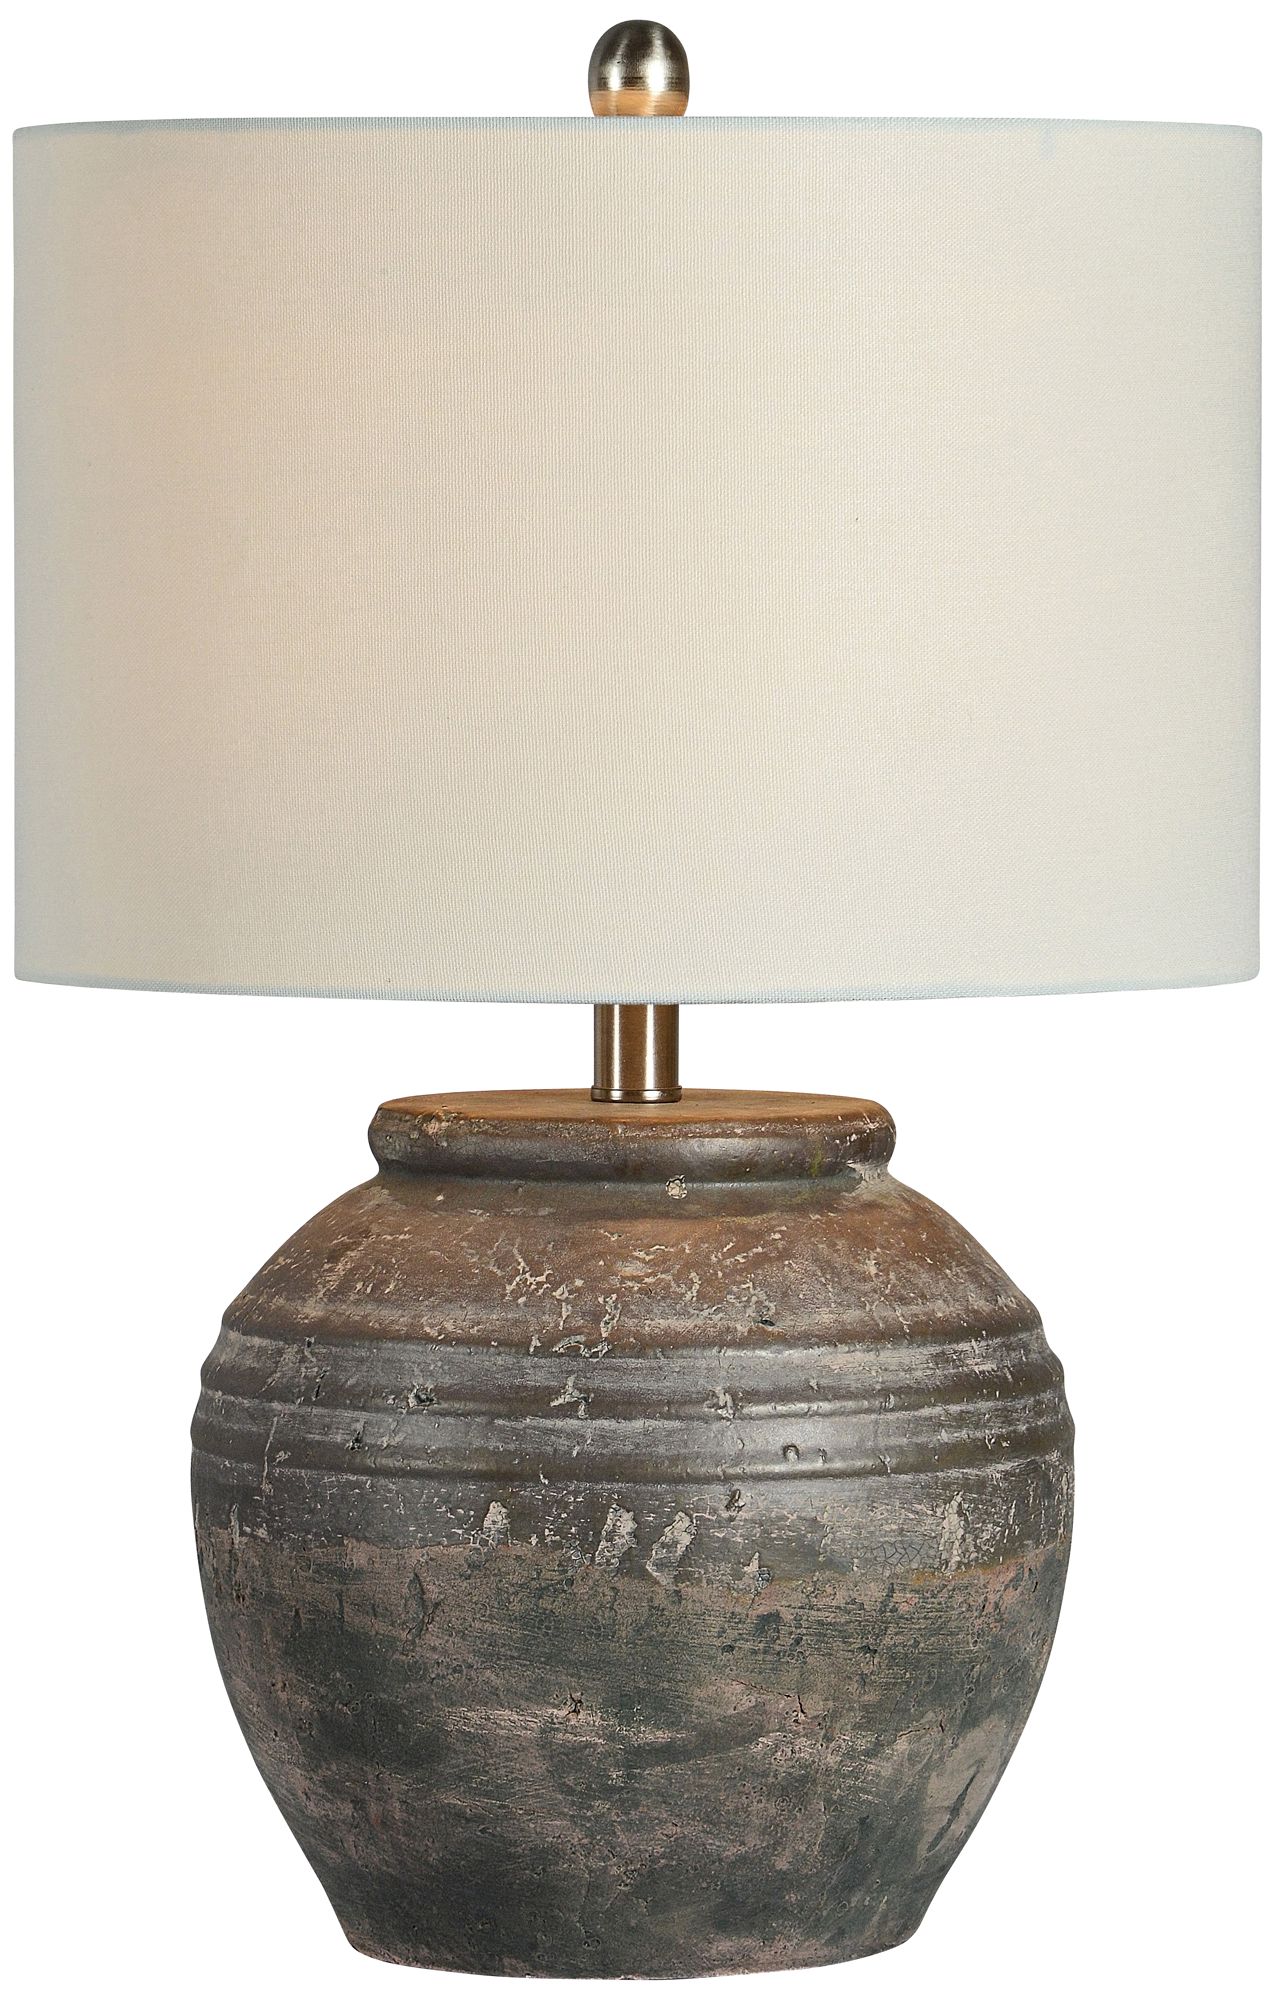 Douglas Shades of Brown Ceramic Accent Table Lamp